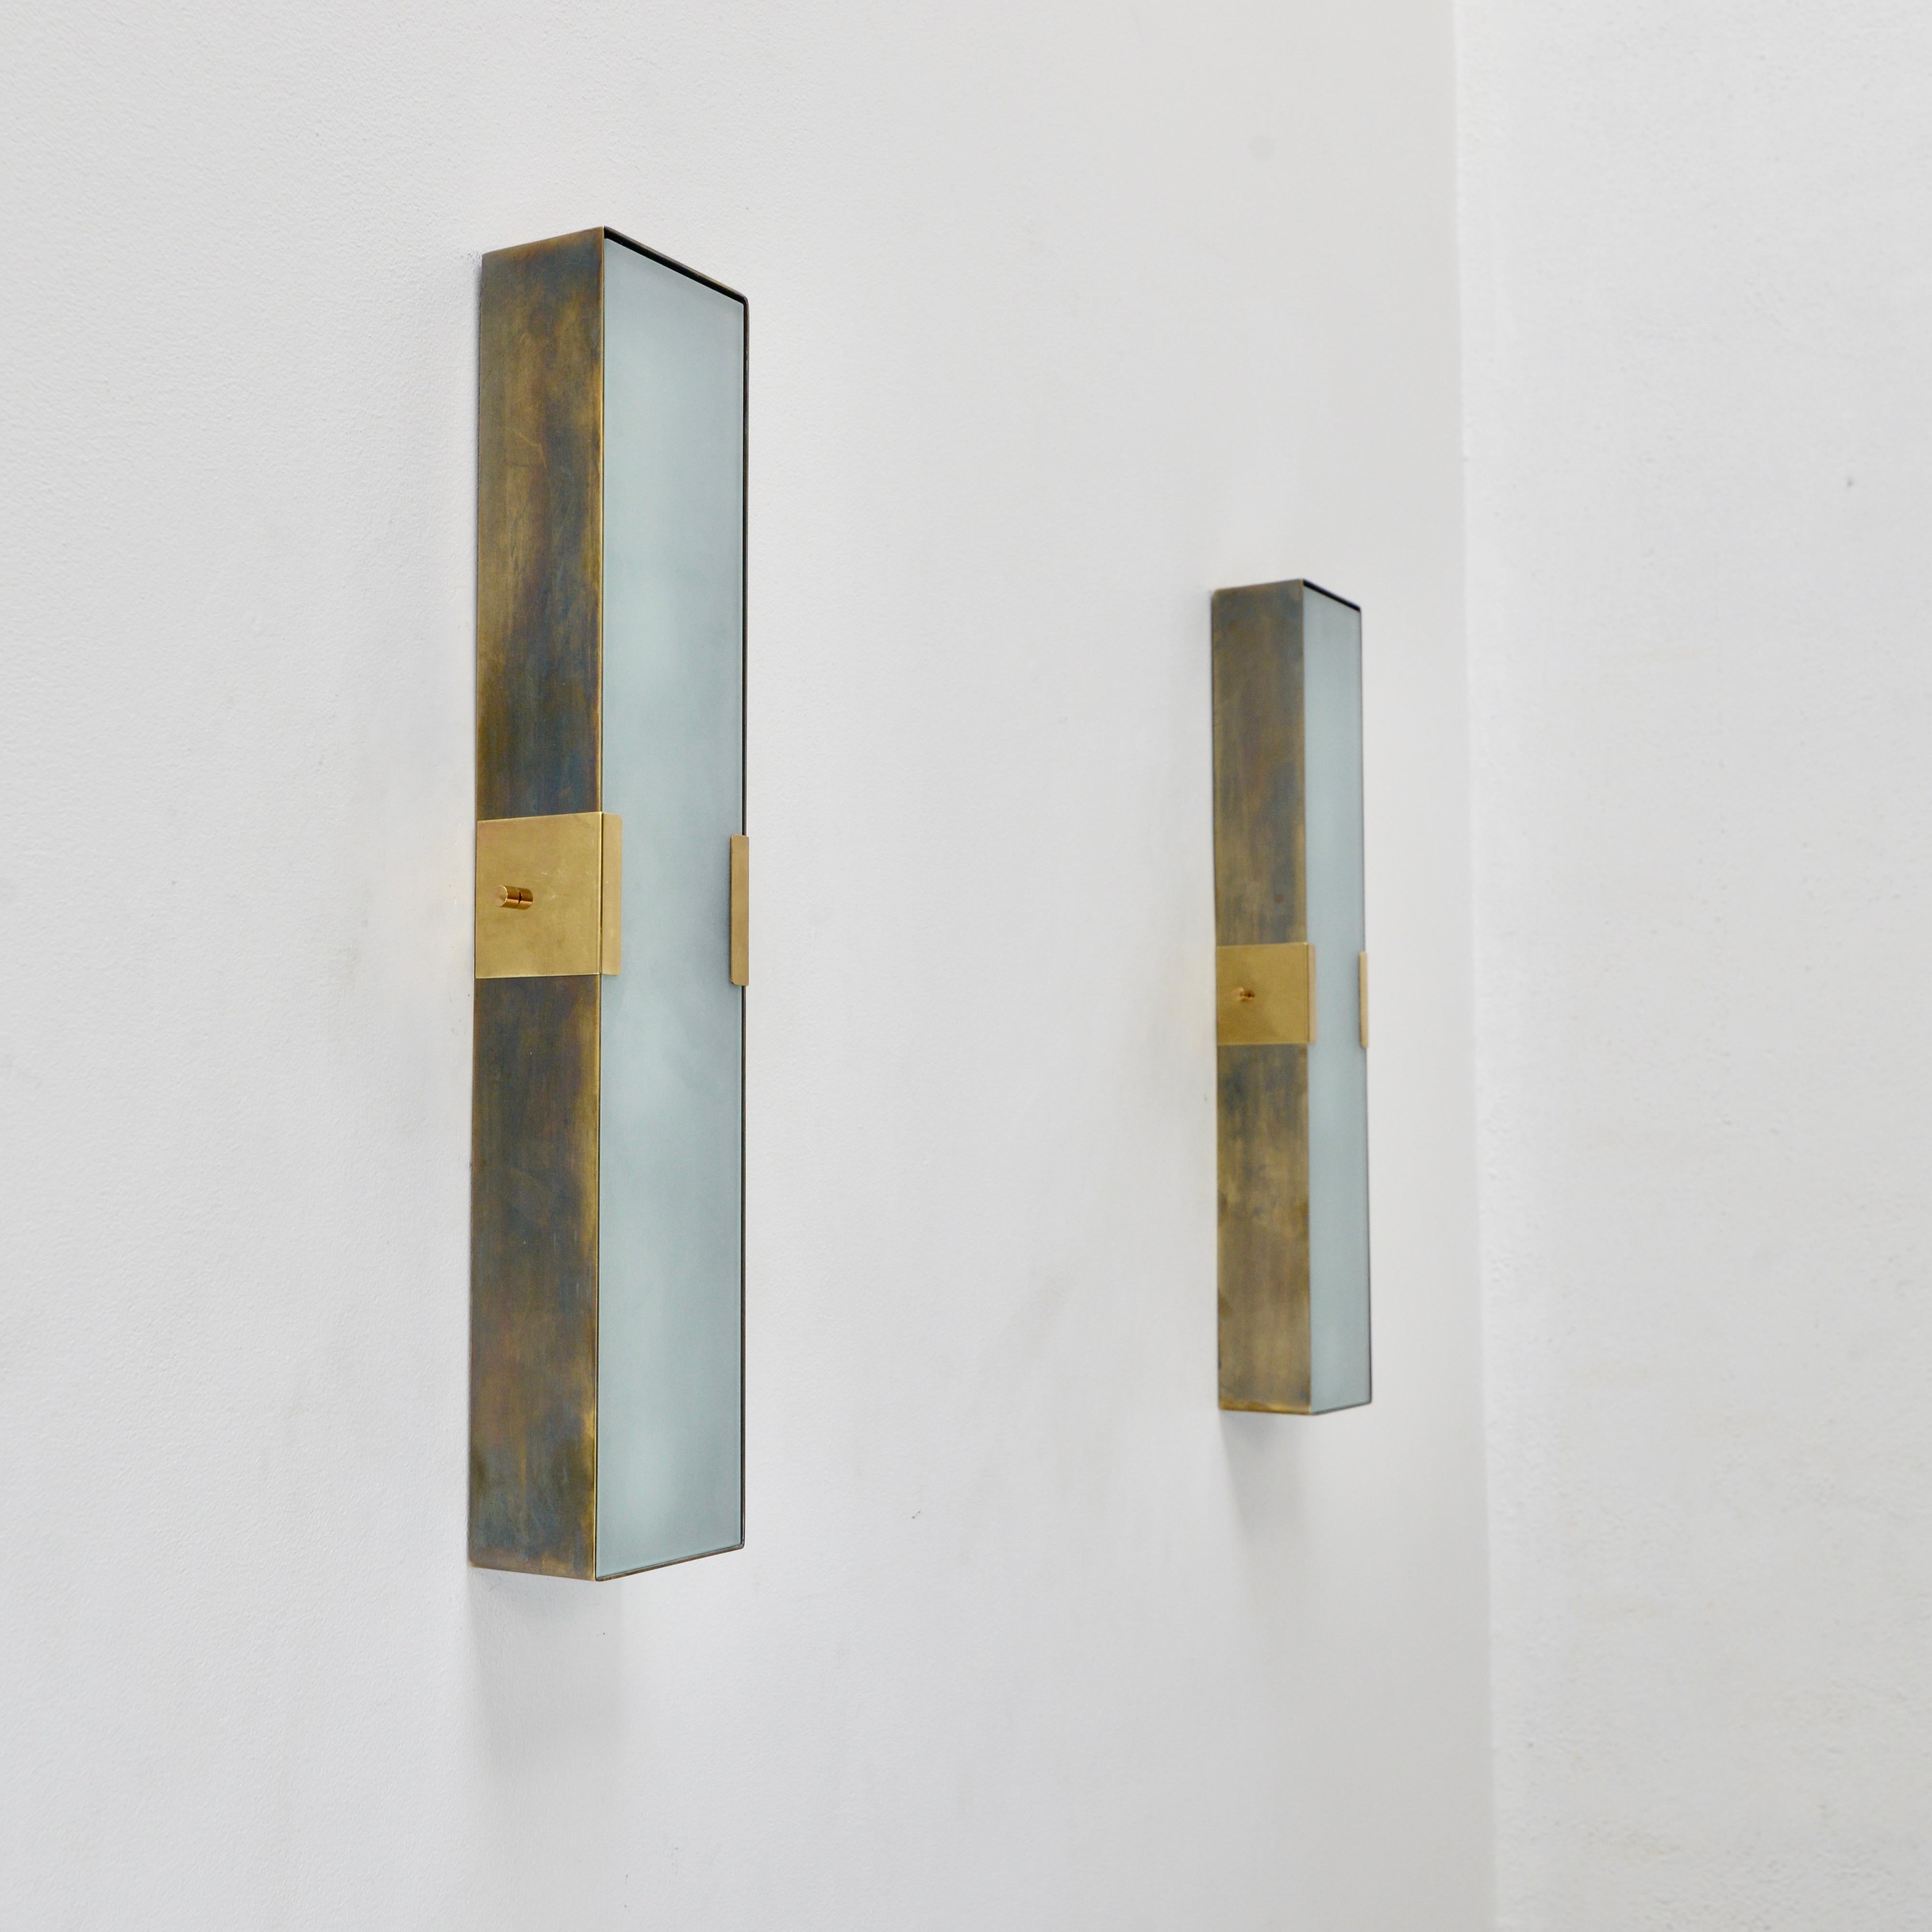 Part of Lumfardo Luminaries contemporary collection, the LUsquare RT Sconce PB is a narrower and longer expression of our LUsquare Sconce. Classic Mid-Century Modern design made to order. Crafted from patinated steel, patinated brass and glass, this